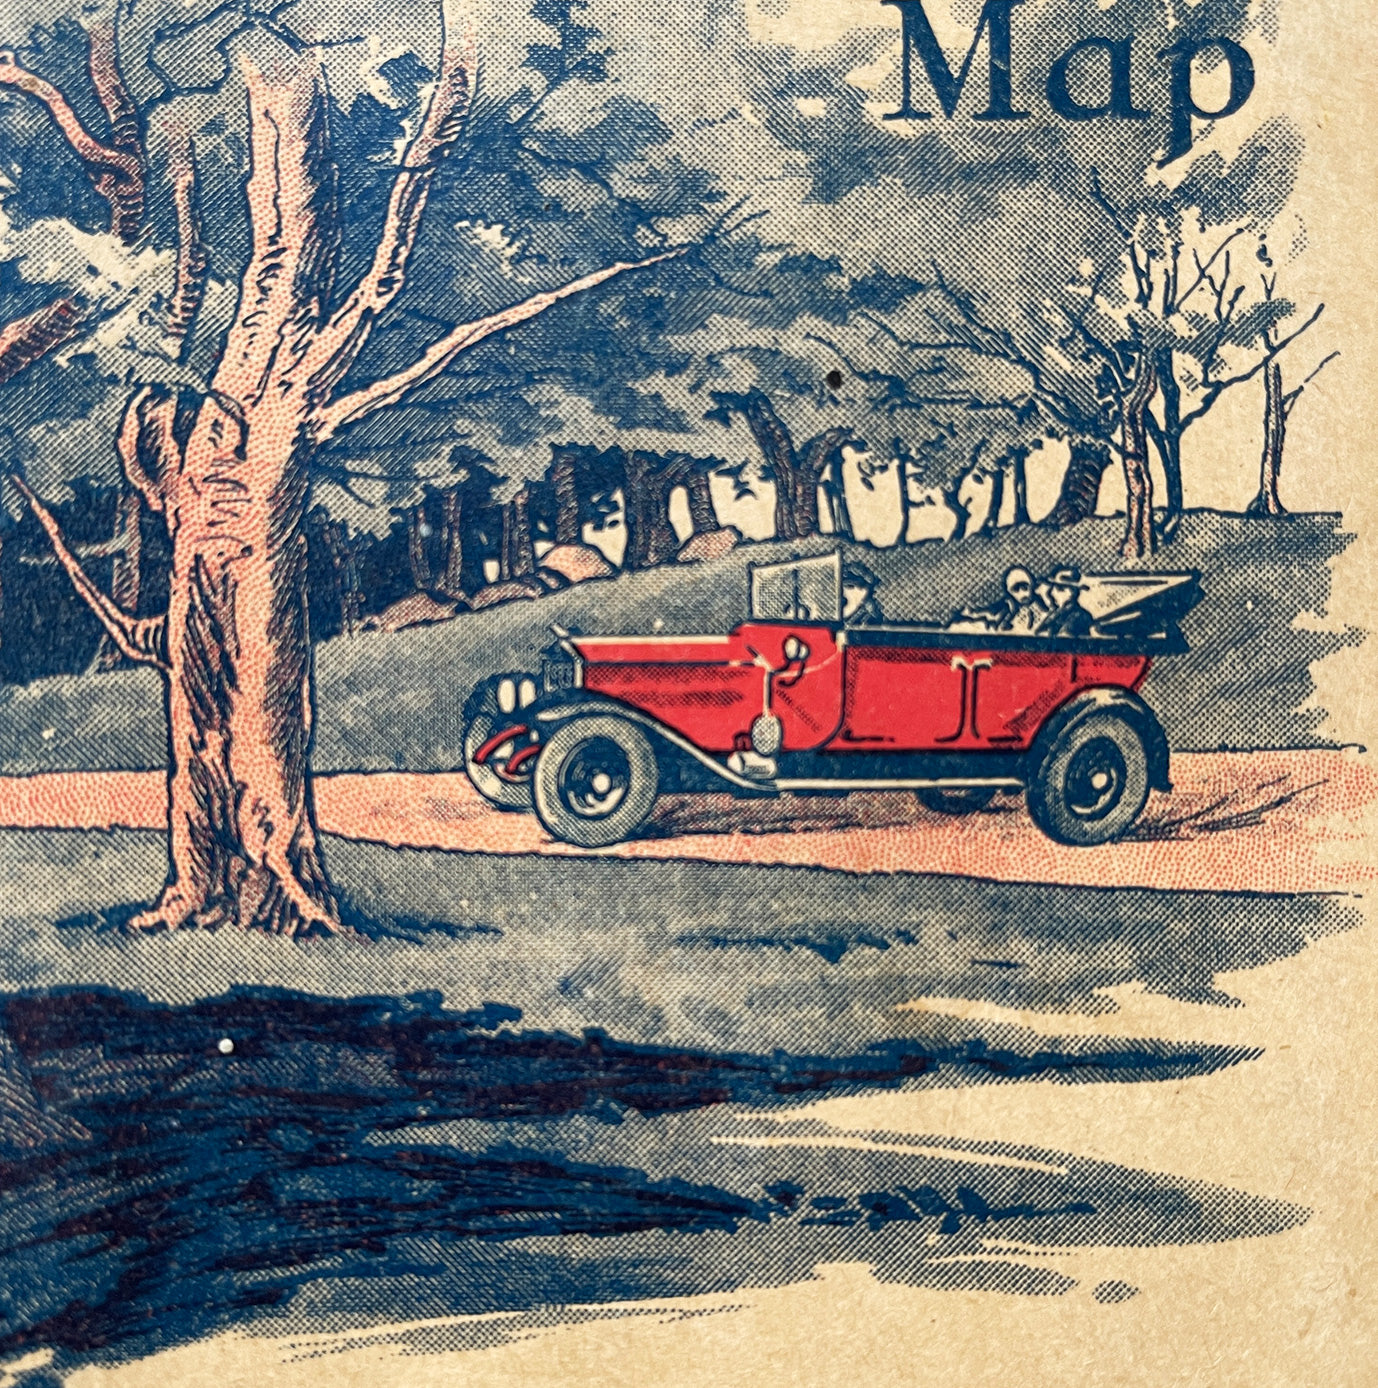 A 1930s 'Motoring & Touring Map' for the South East of England. The cover has a great illustration of a vintage car parked up in the woods. The map covers North Essex down to the South Coast showing all 'First Class Roads' and is in fantastic condition - SHOP NOW - www.intovintage.co.uk